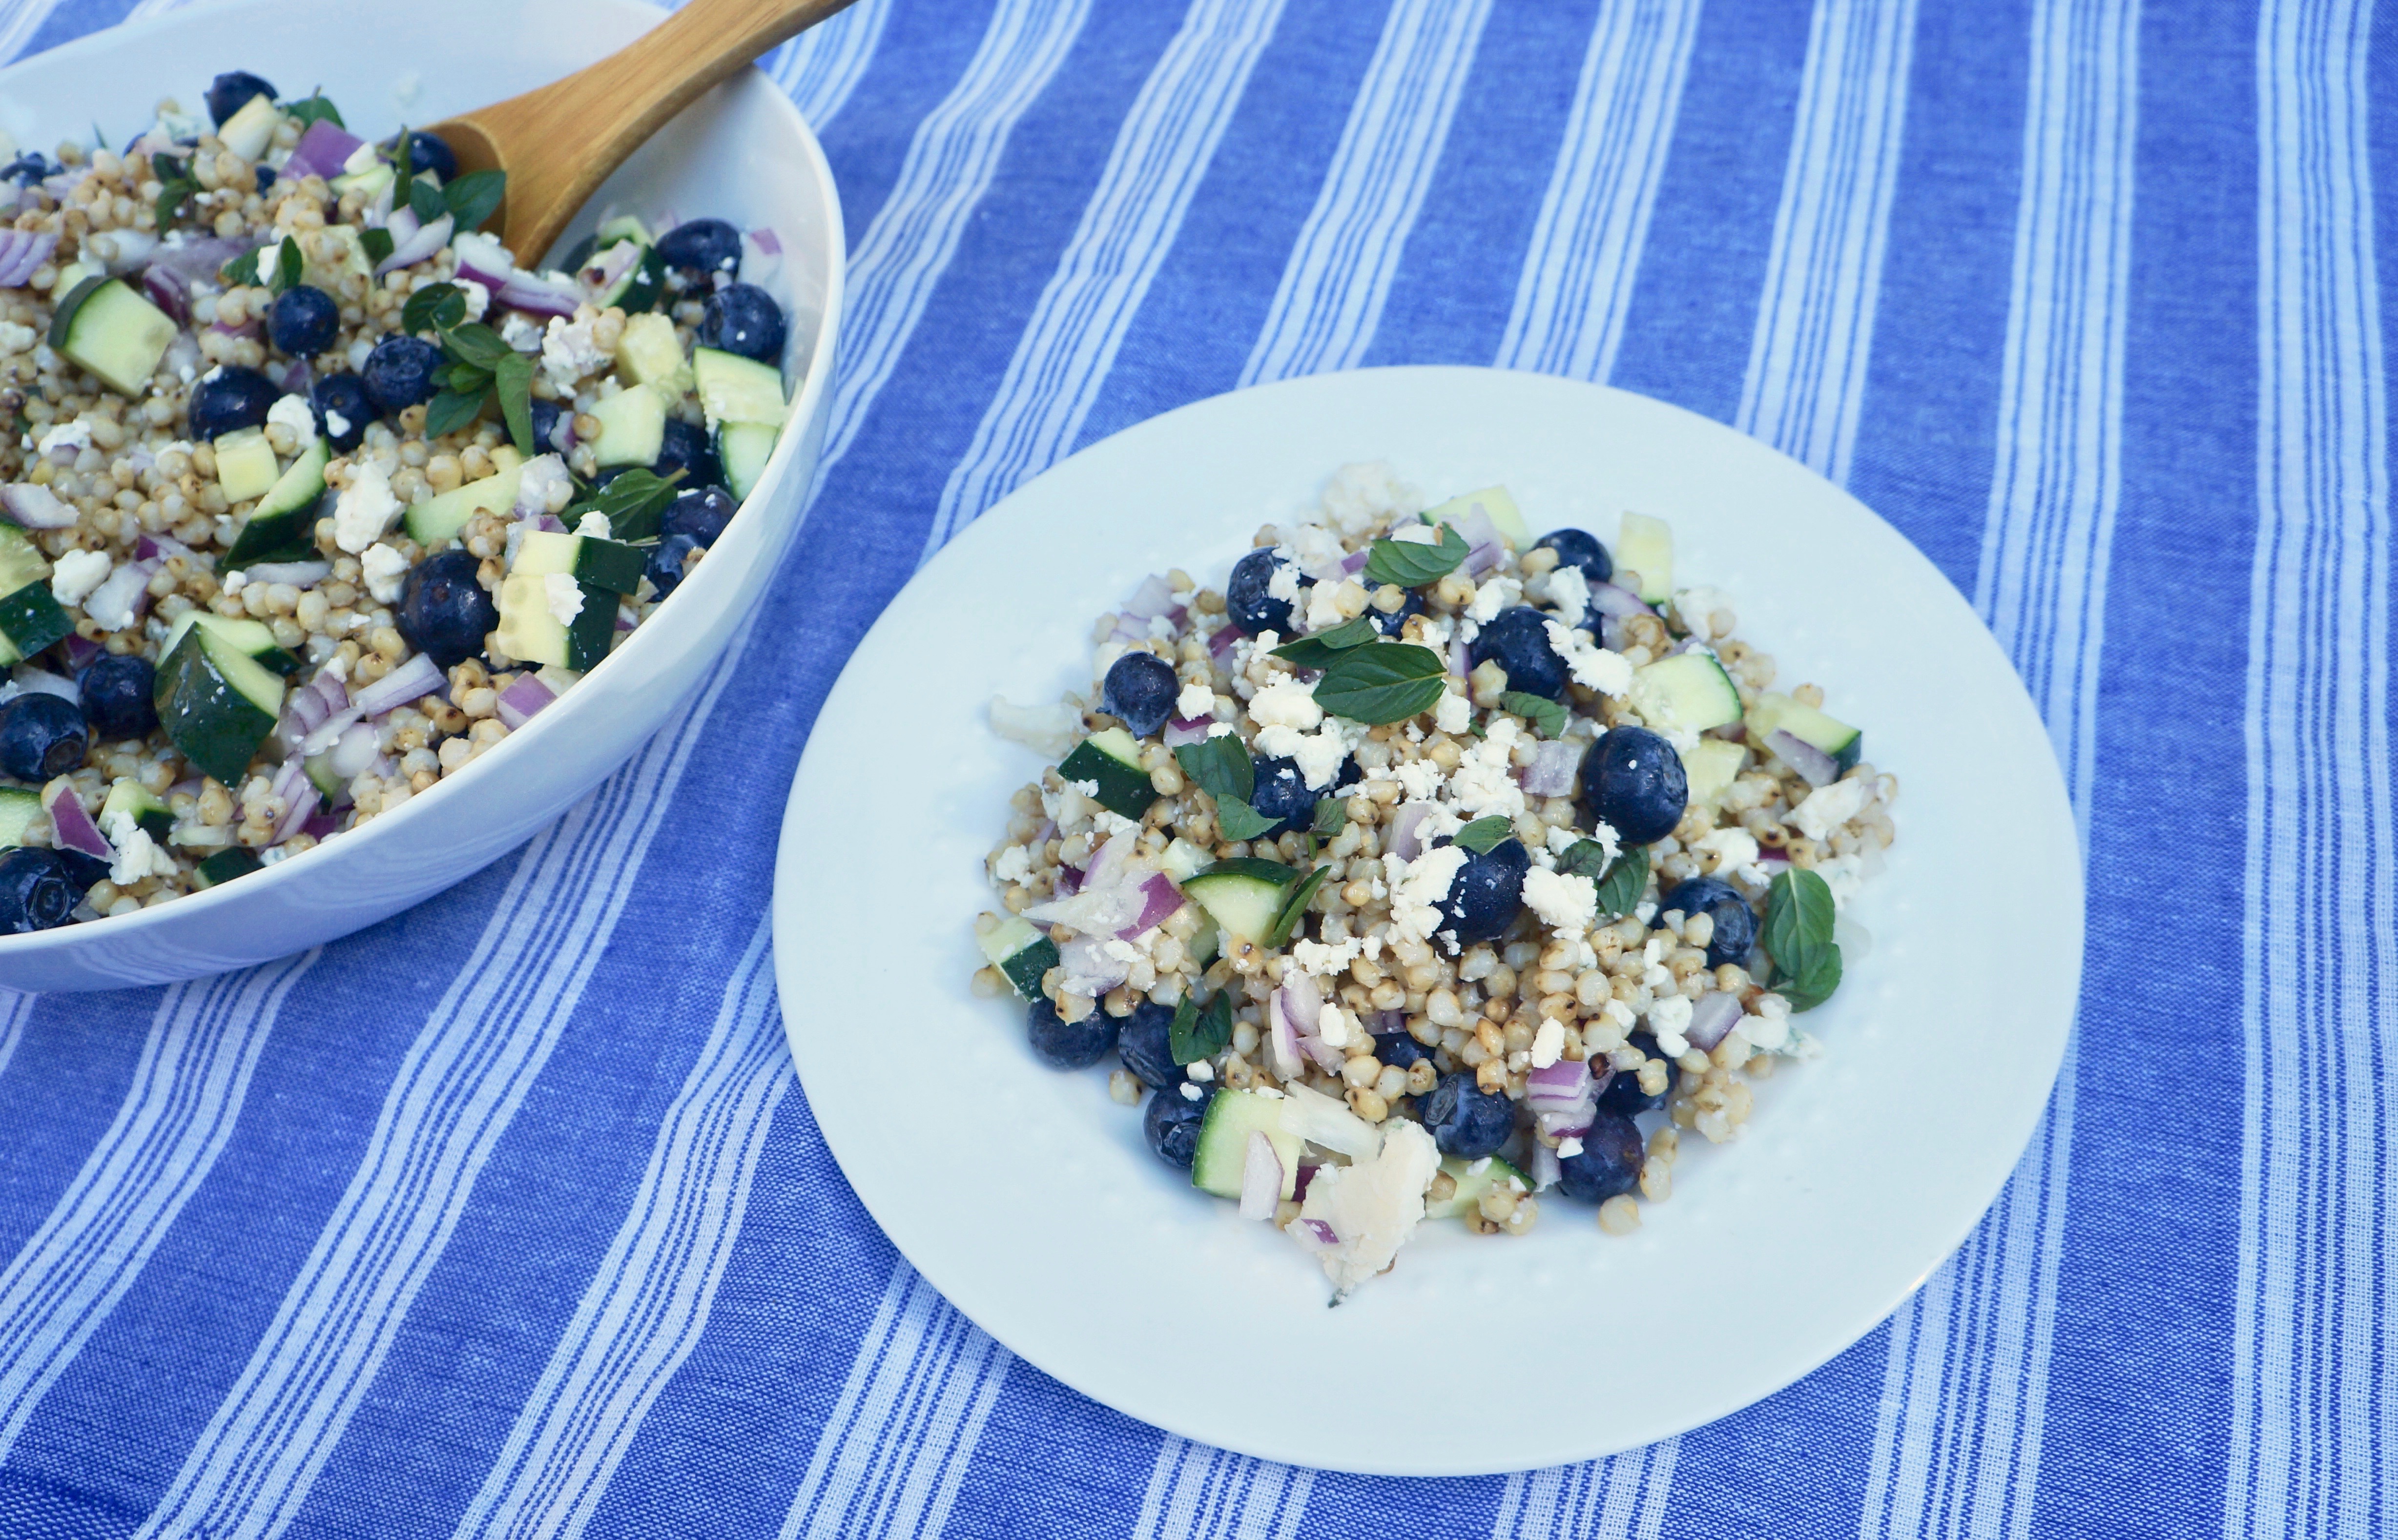 sorghum & blues salad with blueberries and blue cheese